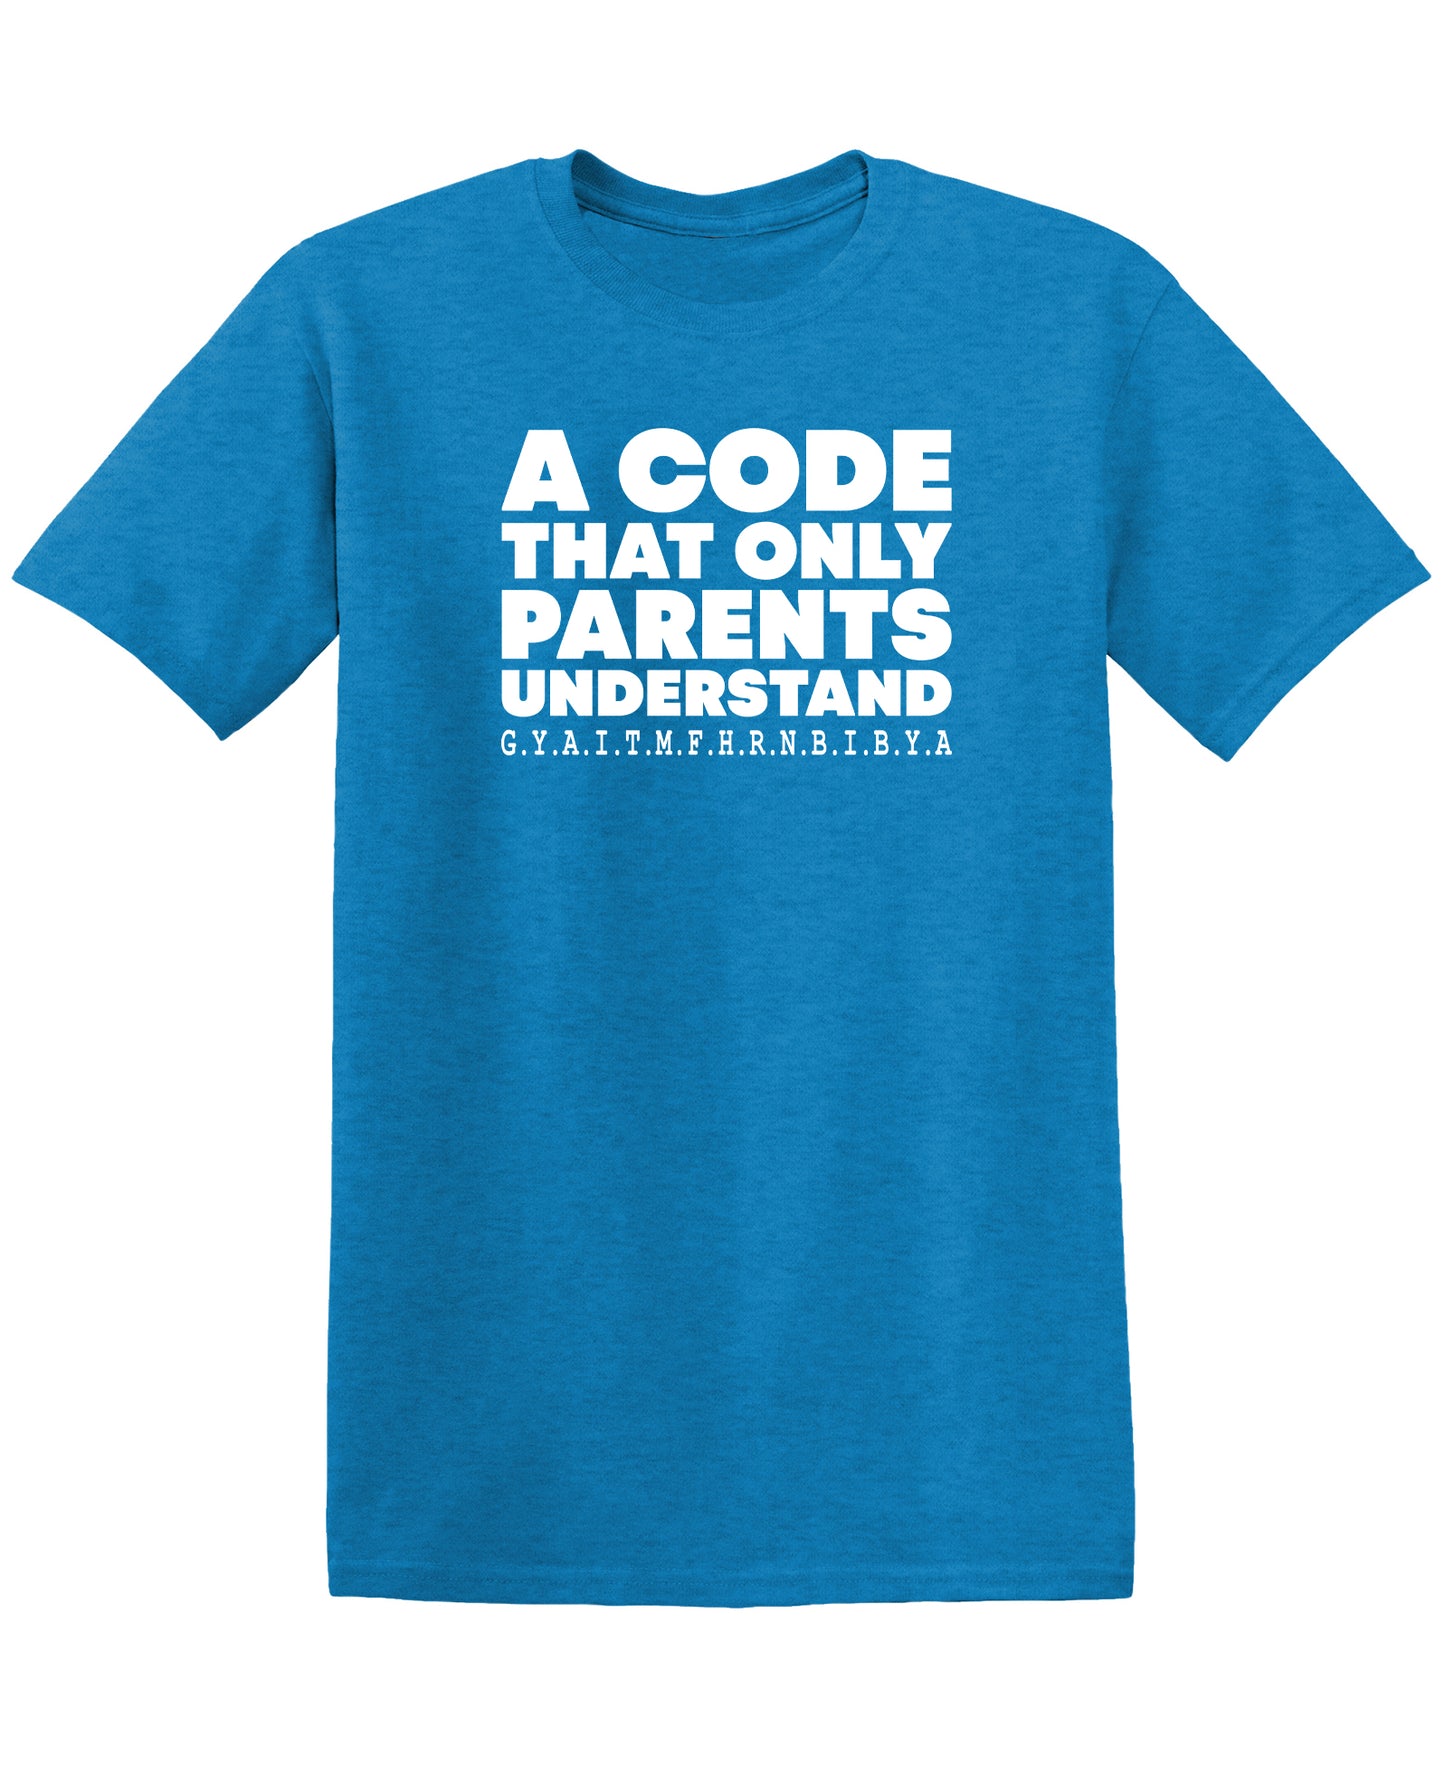 A Code that Only Parents Understand